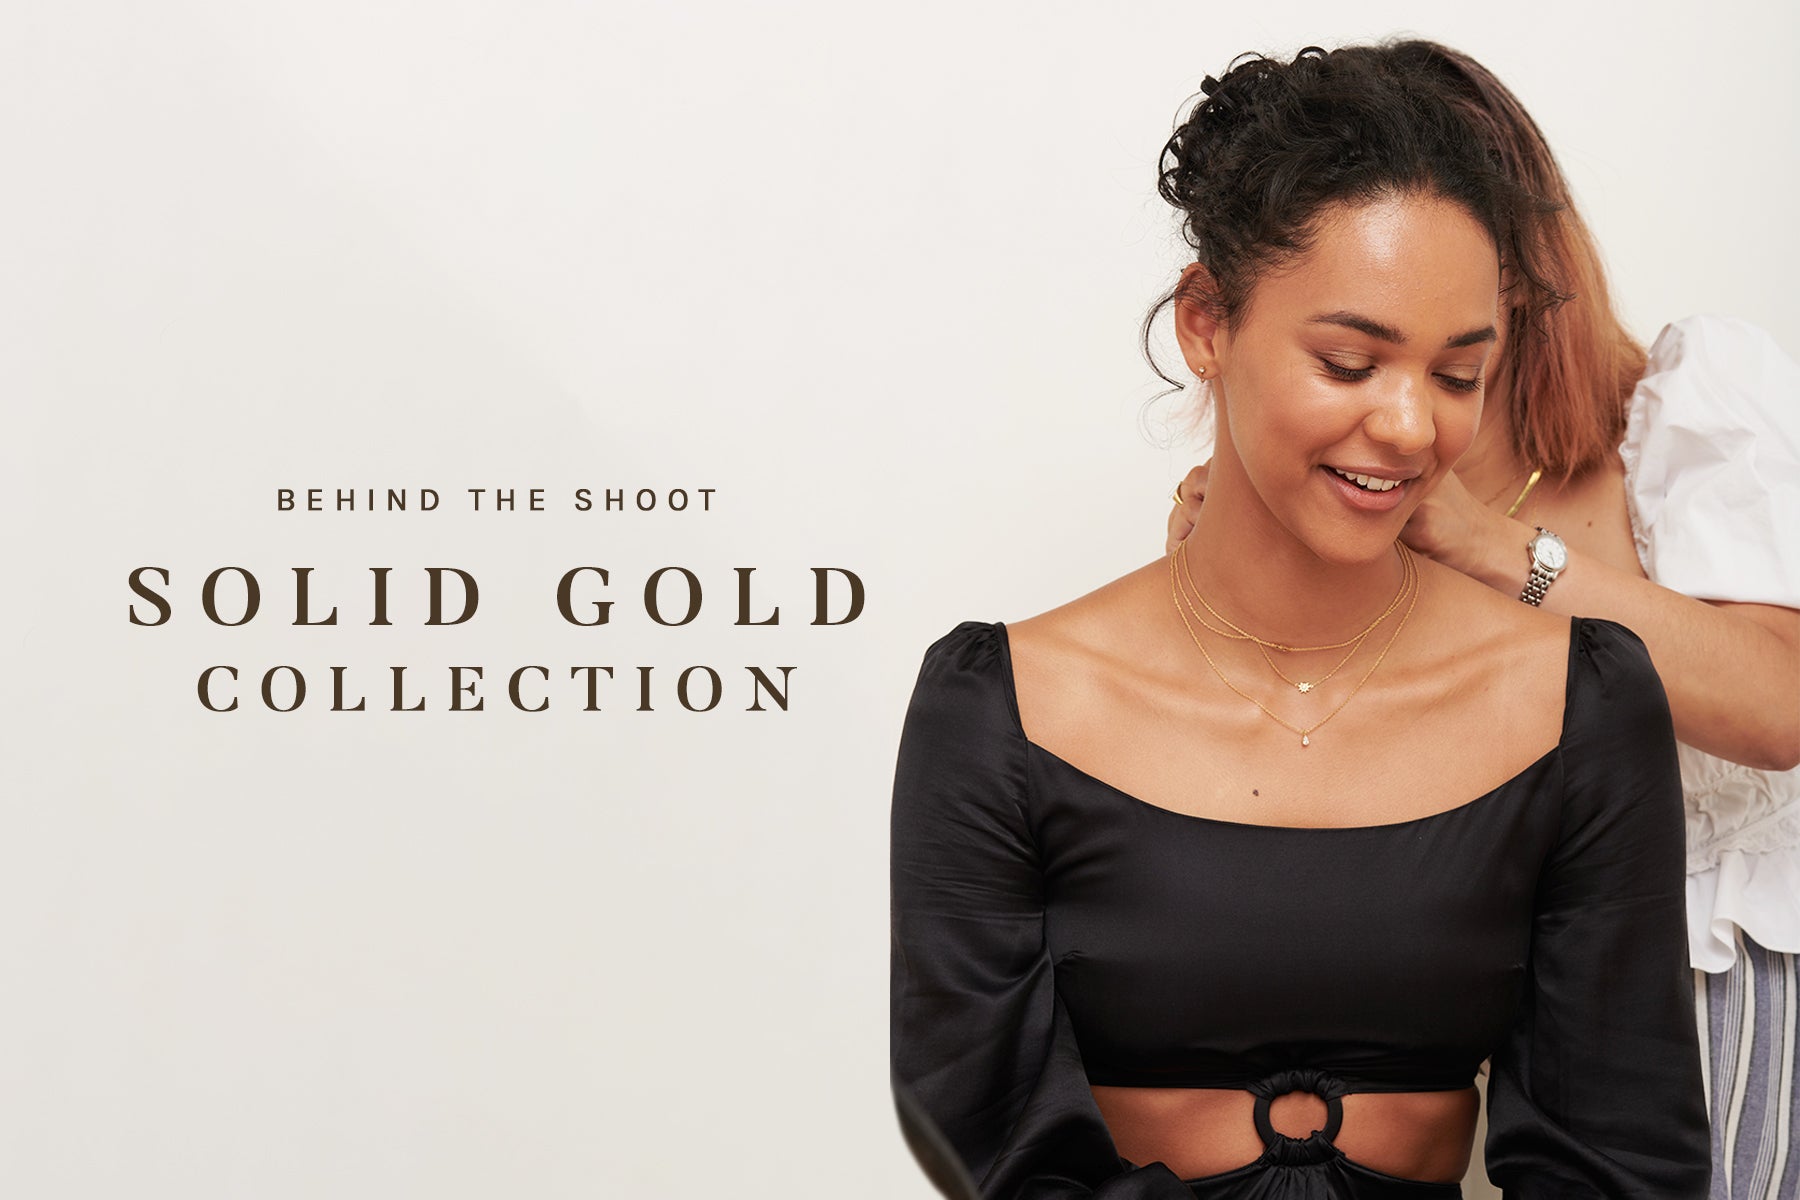 BEHIND THE SHOOT - SOLID GOLD